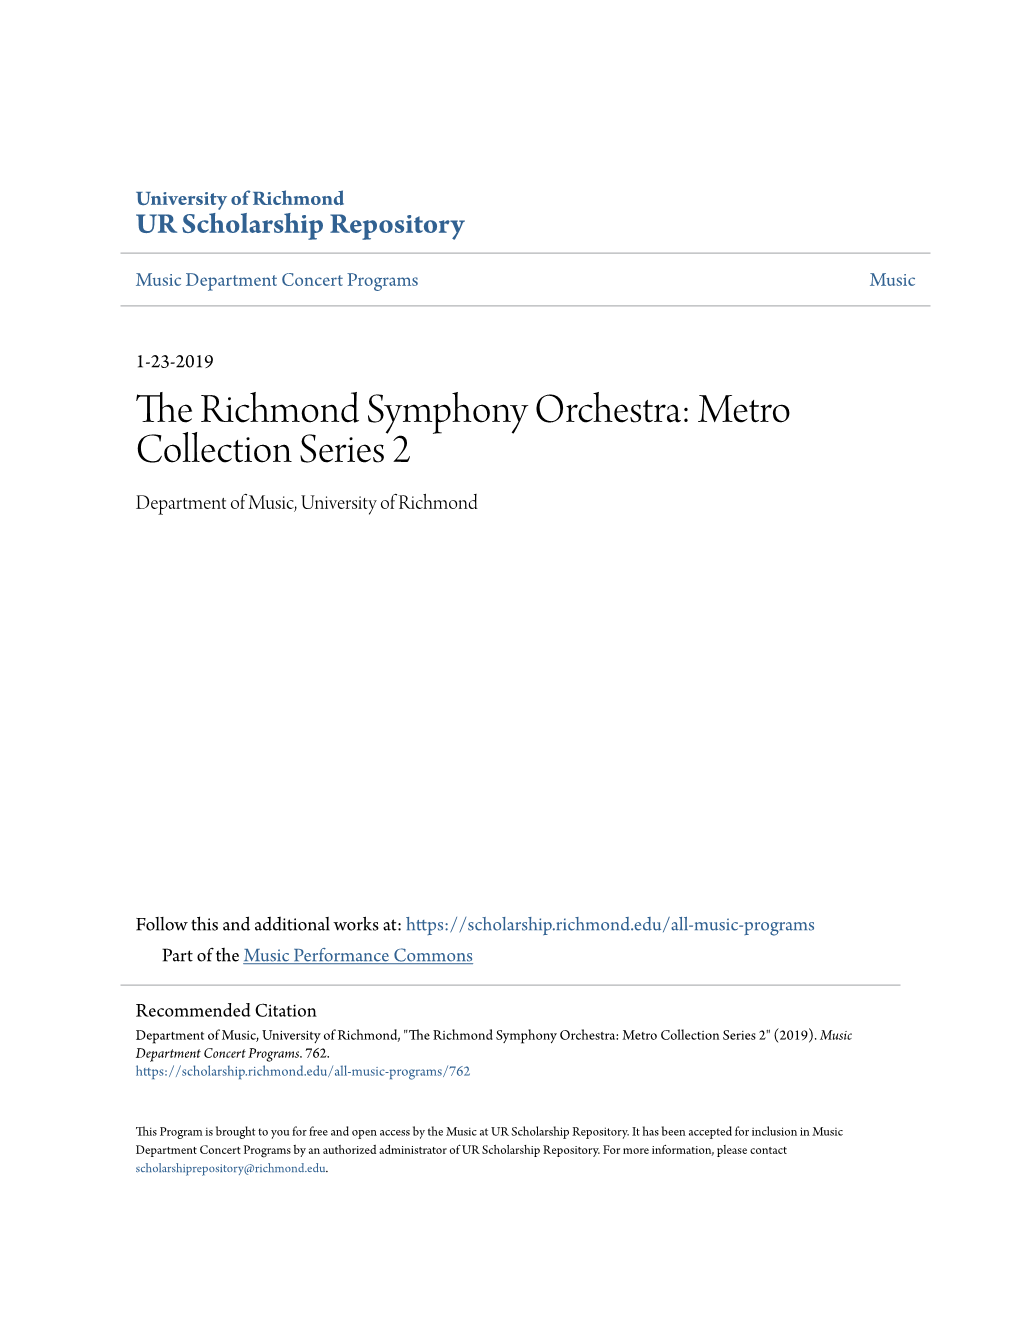 The Richmond Symphony Orchestra: Metro Collection Series 2 Department of Music, University of Richmond